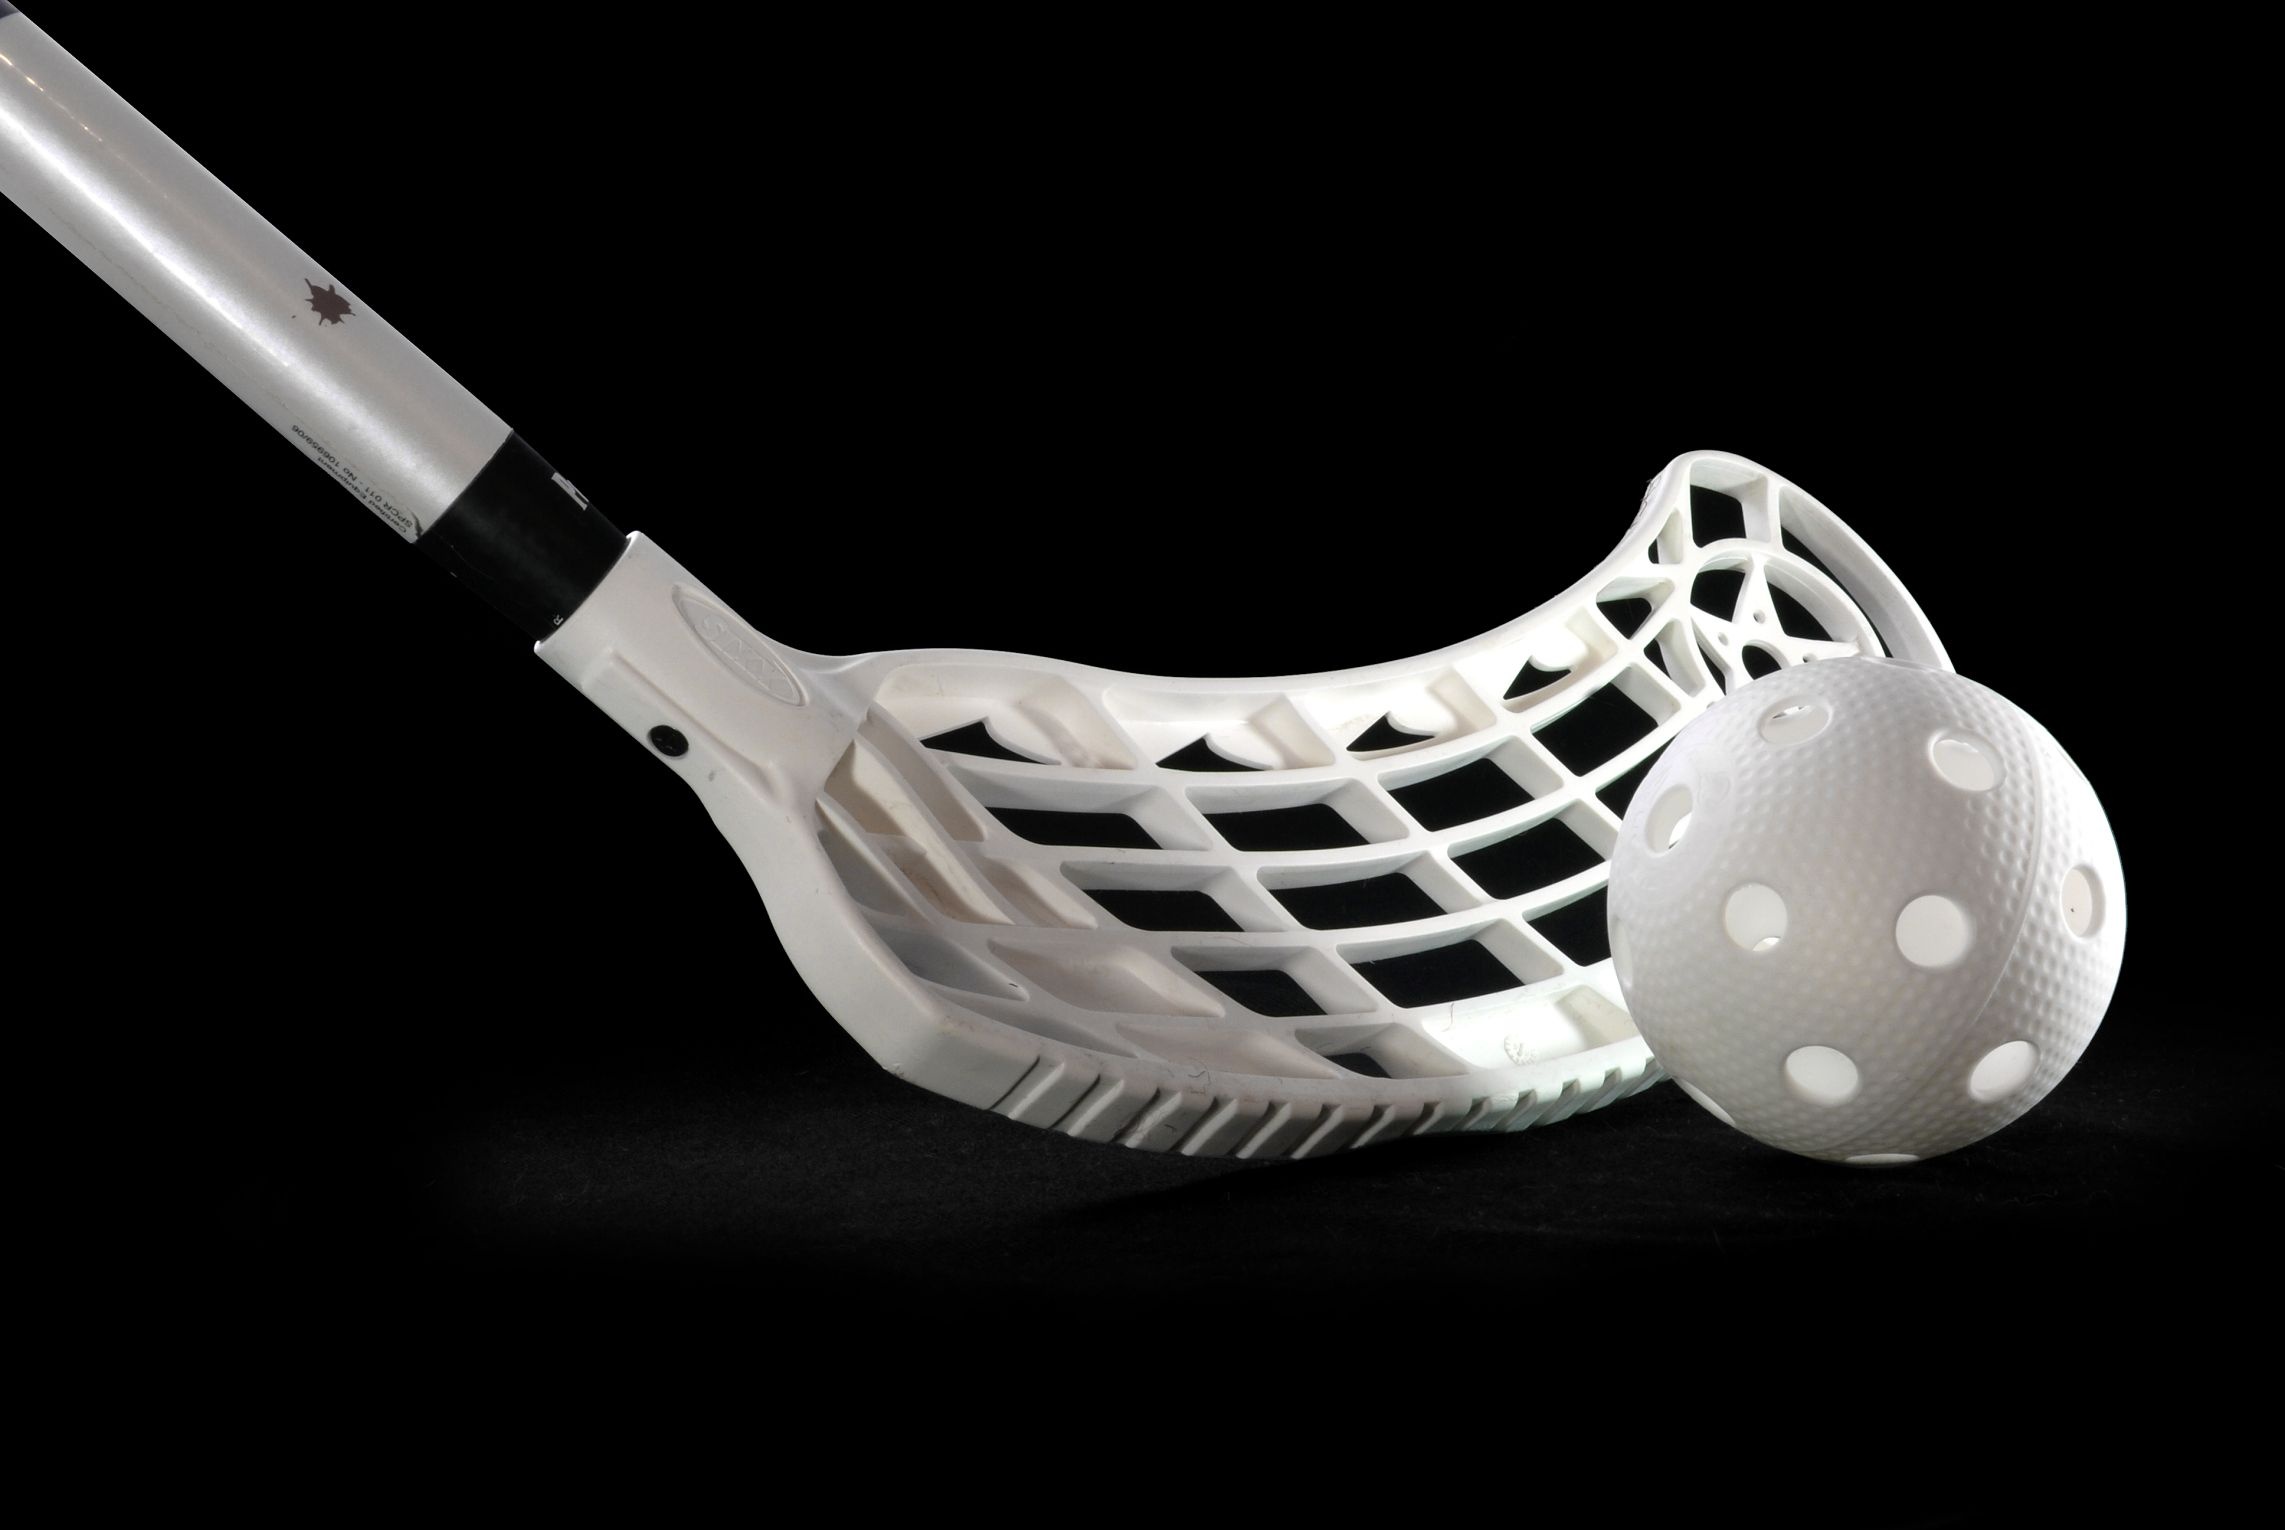 Floorball: A stick and a ball in the shade, Equipment for a modern indoor sports discipline. 2290x1530 HD Wallpaper.